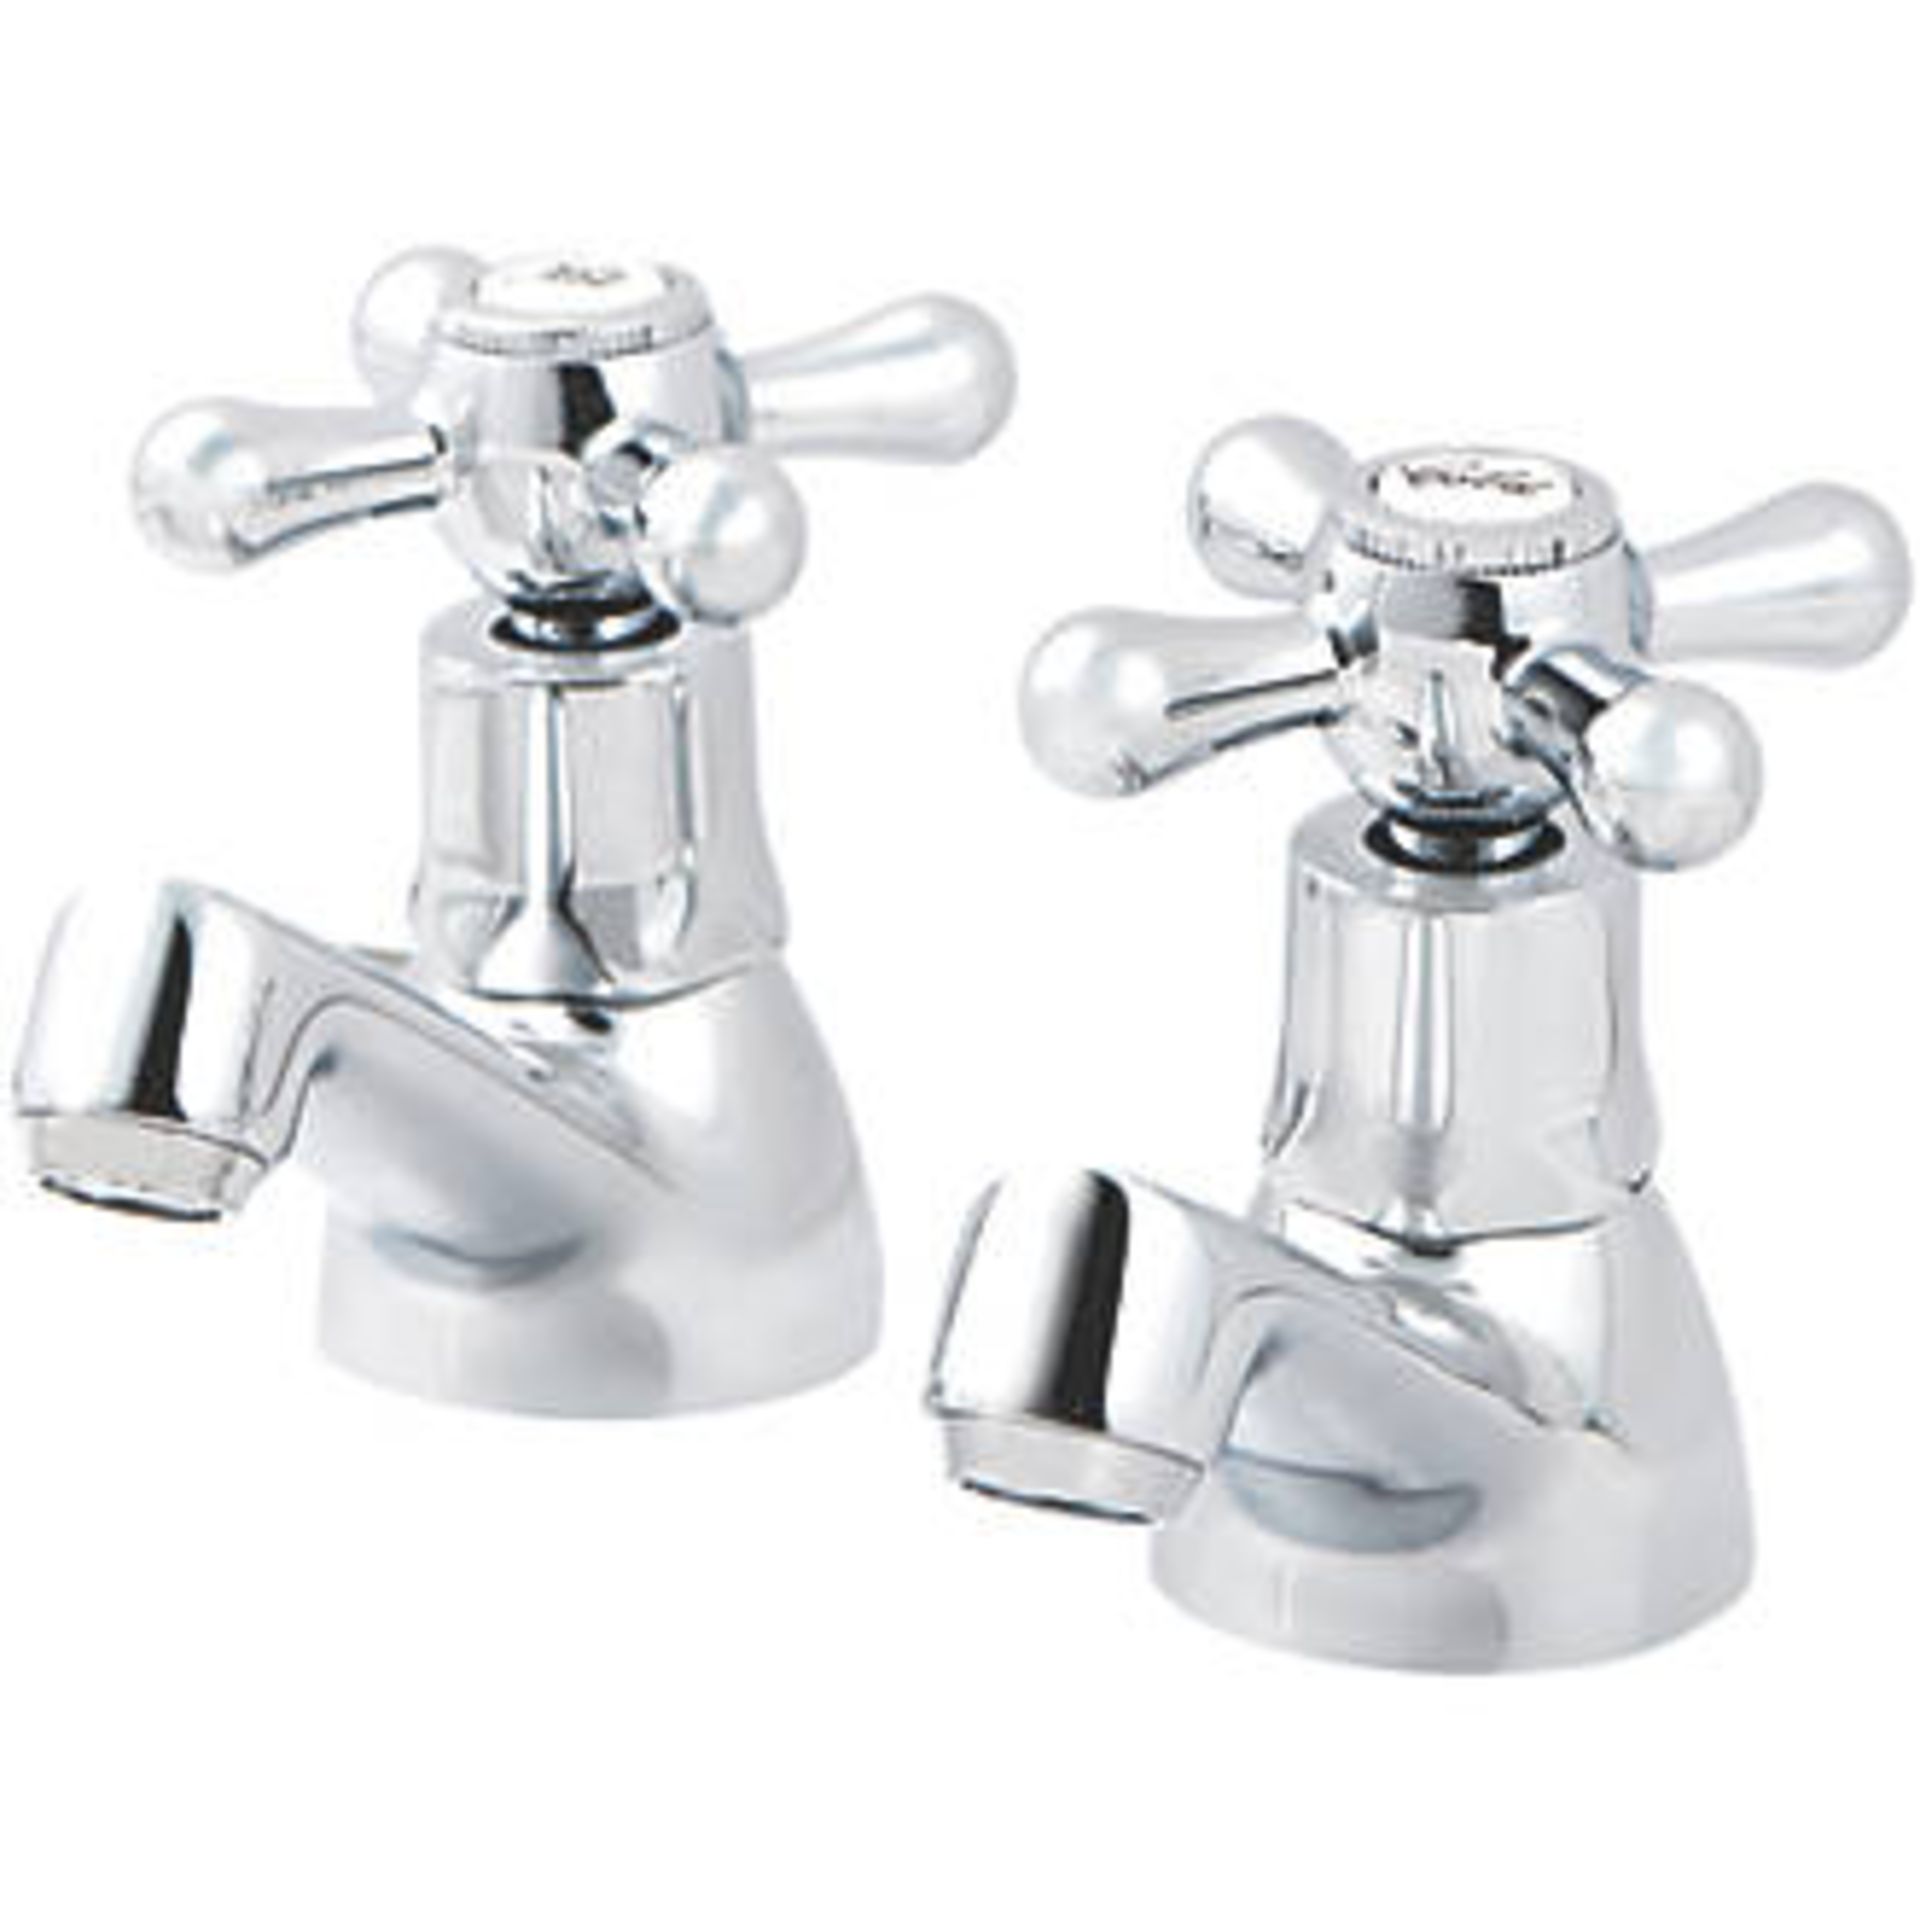 (Q12) ETEL BASIN PILLAR TAPS. 1/4 Turn Suitable for High & Low Pressure Systems Chrome Waste...